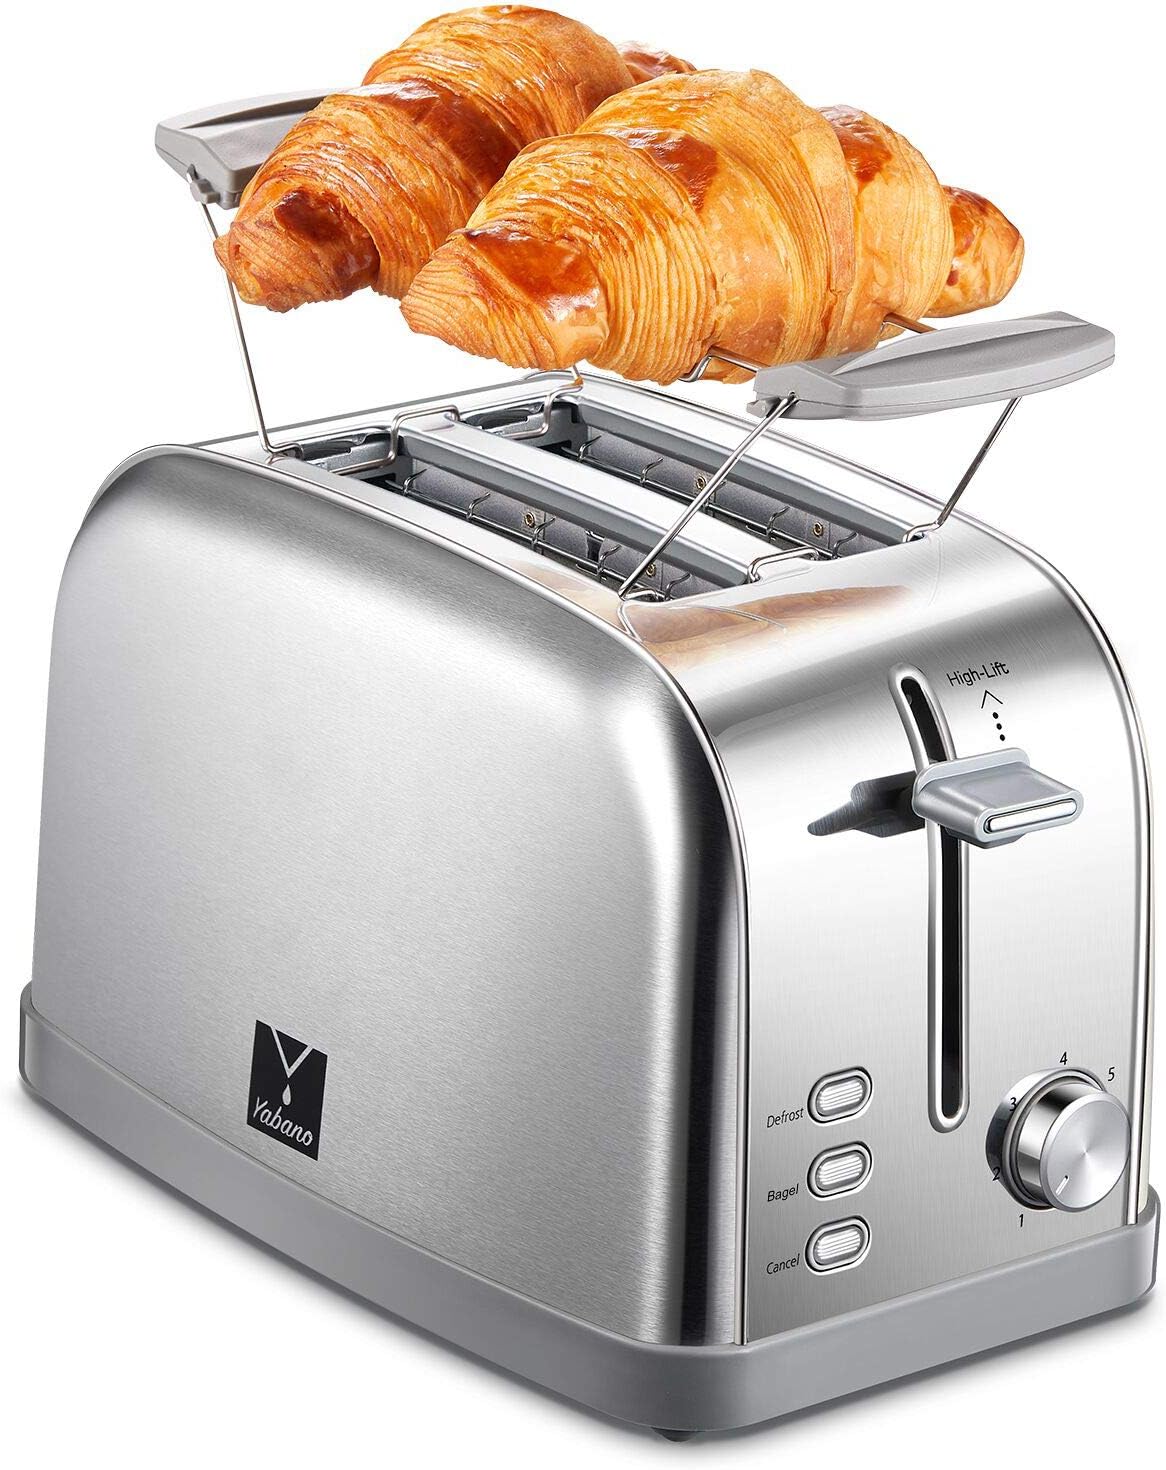 2 slice toaster, Retro Bagel Toaster Toaster with 7 Bread Shade Settings, 2 Extra Wide Slots, Defrost/Bagel/Cancel Function, Removable Crumb Tray, Stainless Steel Toaster by Yabano, Silver